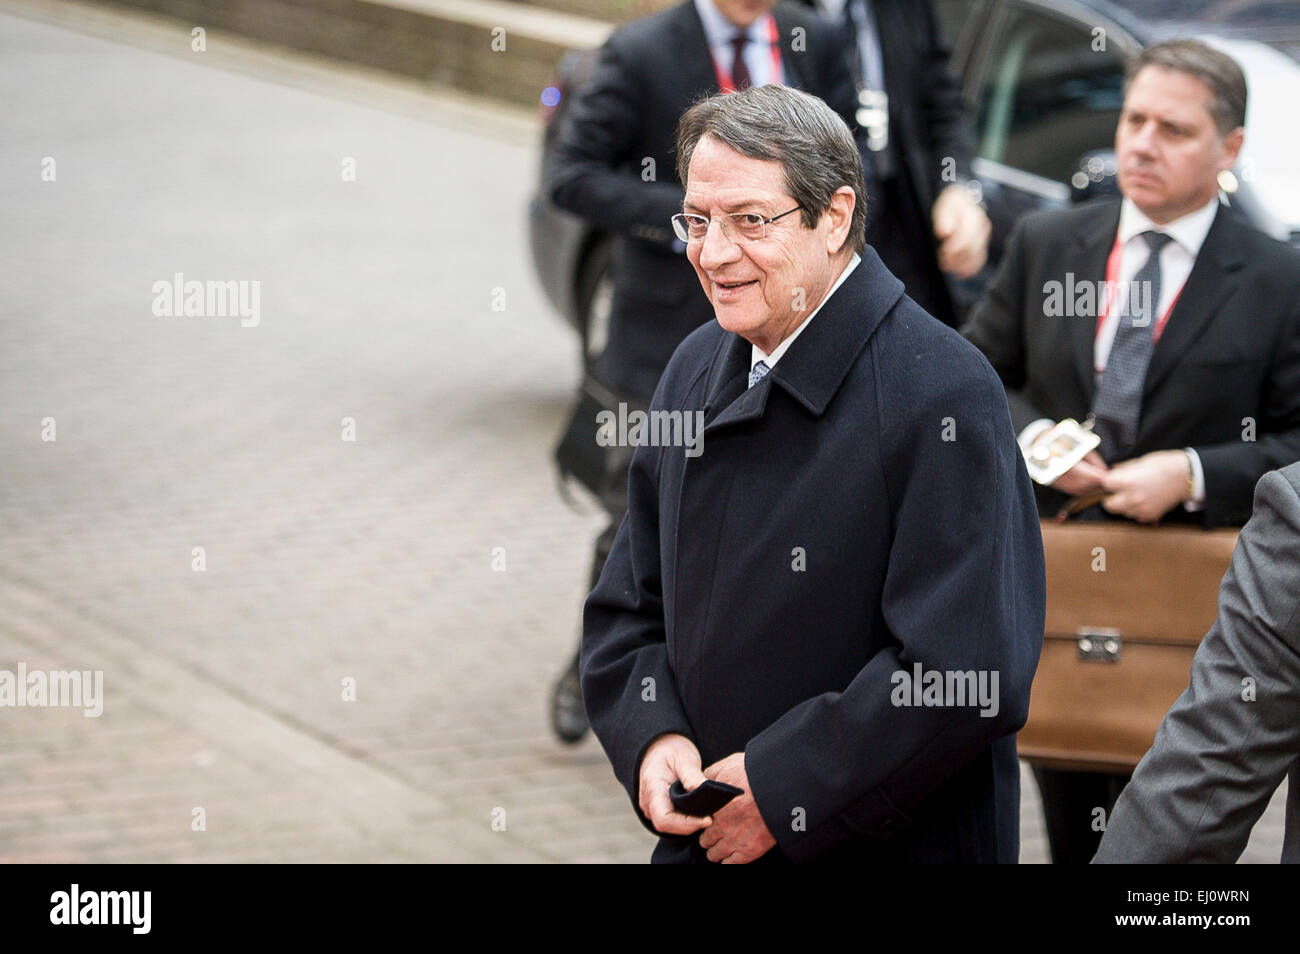 Brussels, Bxl, Belgium. 19th Mar, 2015. Cypriot President Nicos Anastaciades arrives ahead of the EU Summit at European Council headquarters in Brussels, Belgium on 19.03.2015 by Wiktor Dabkowski Credit:  Wiktor Dabkowski/ZUMA Wire/Alamy Live News Stock Photo